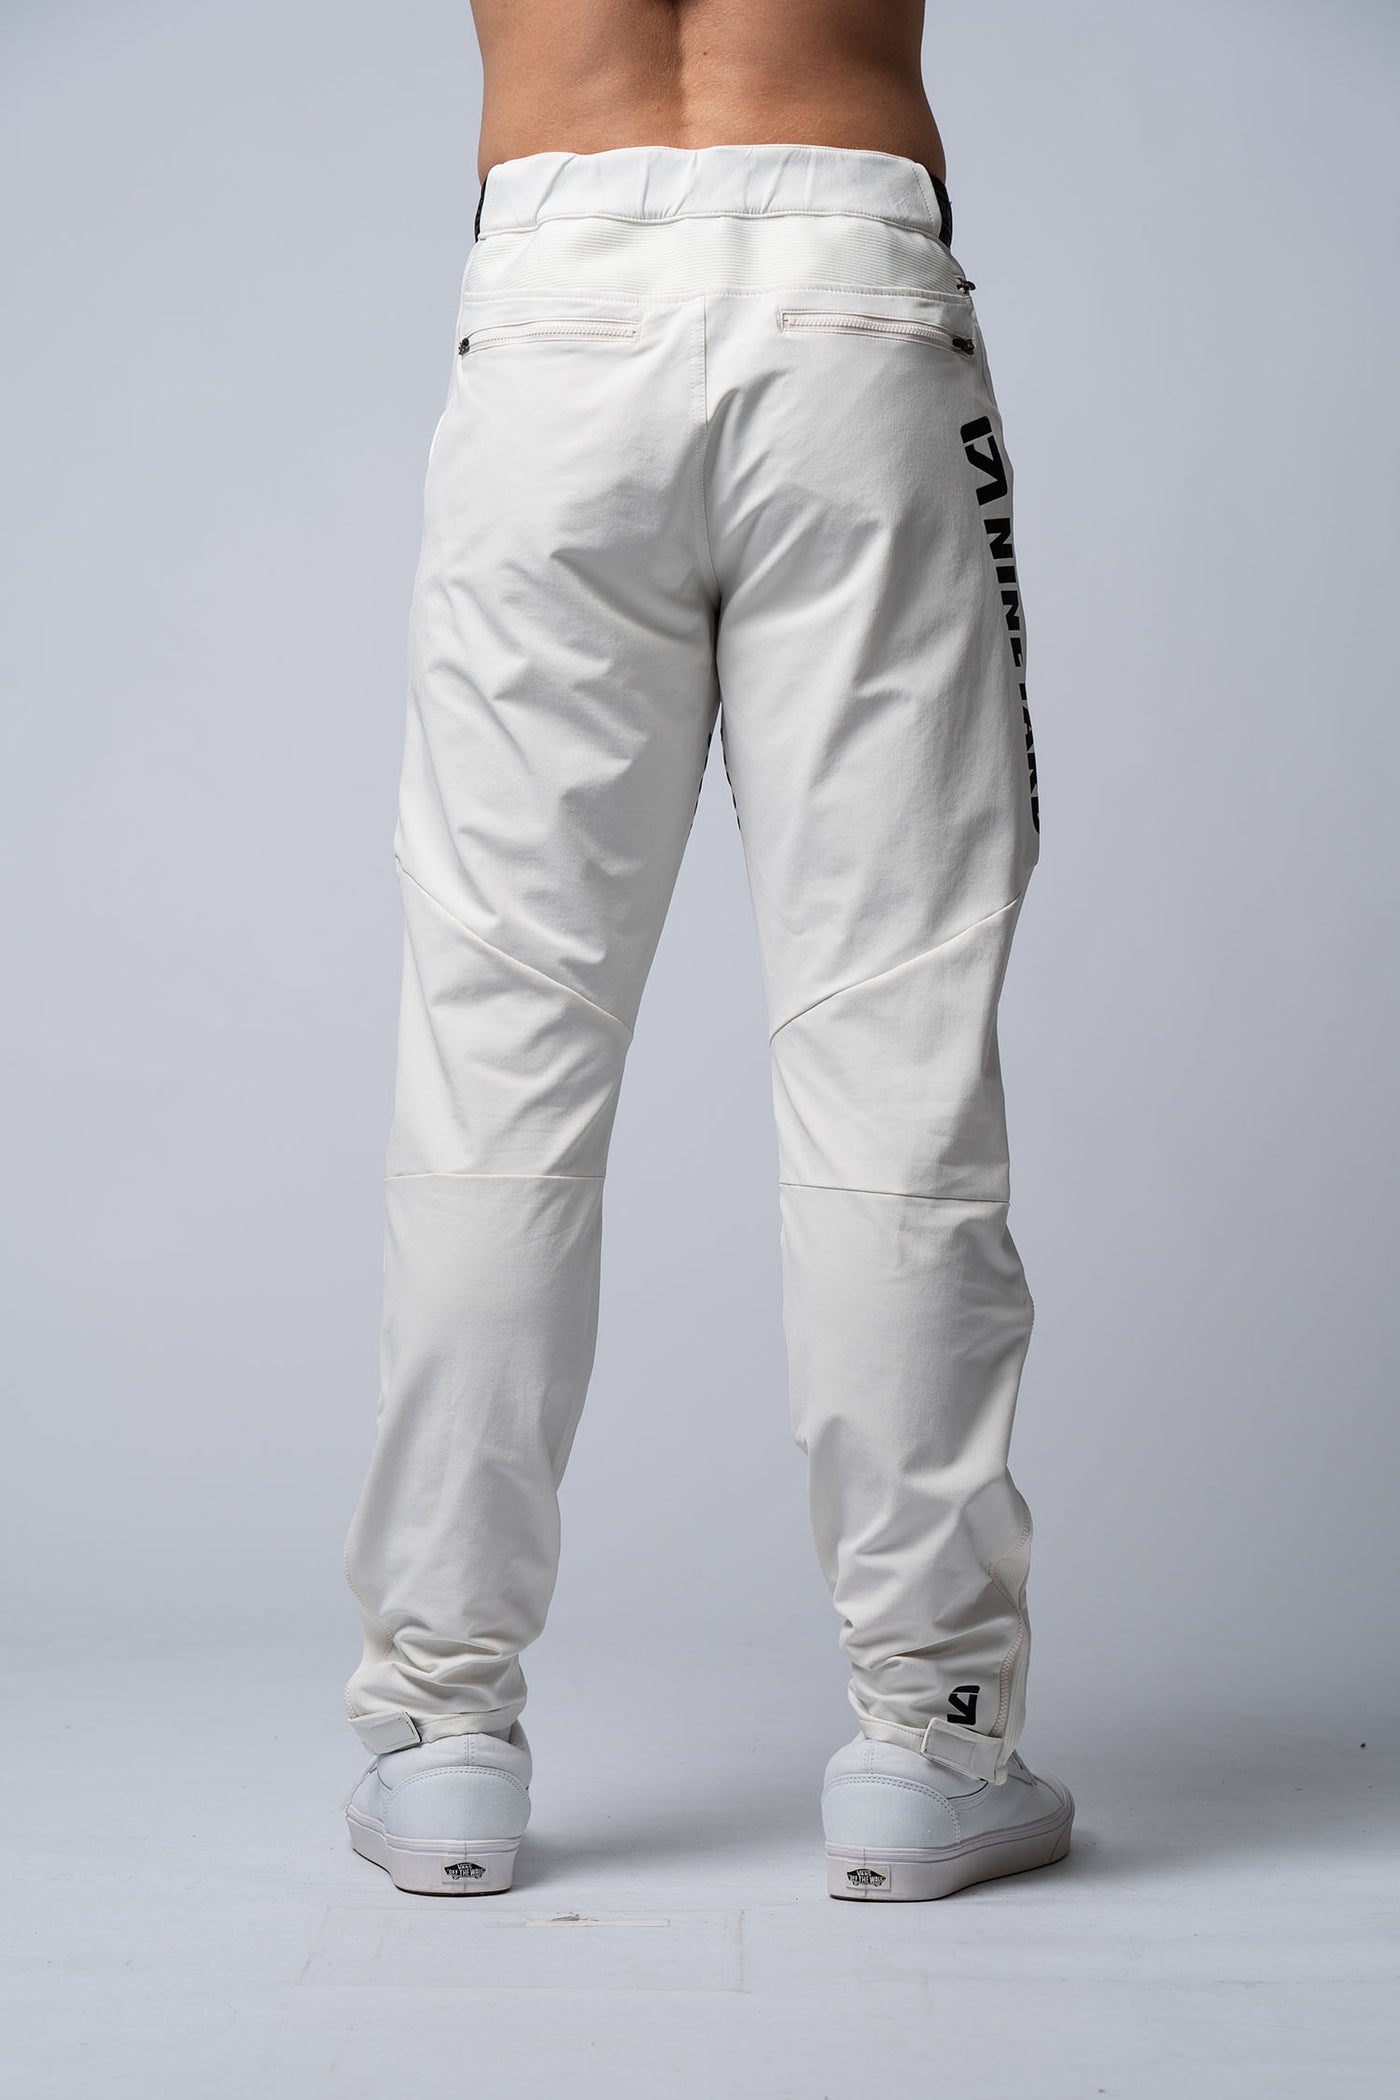 RAW Riding Pants off-white - WITH LOGO